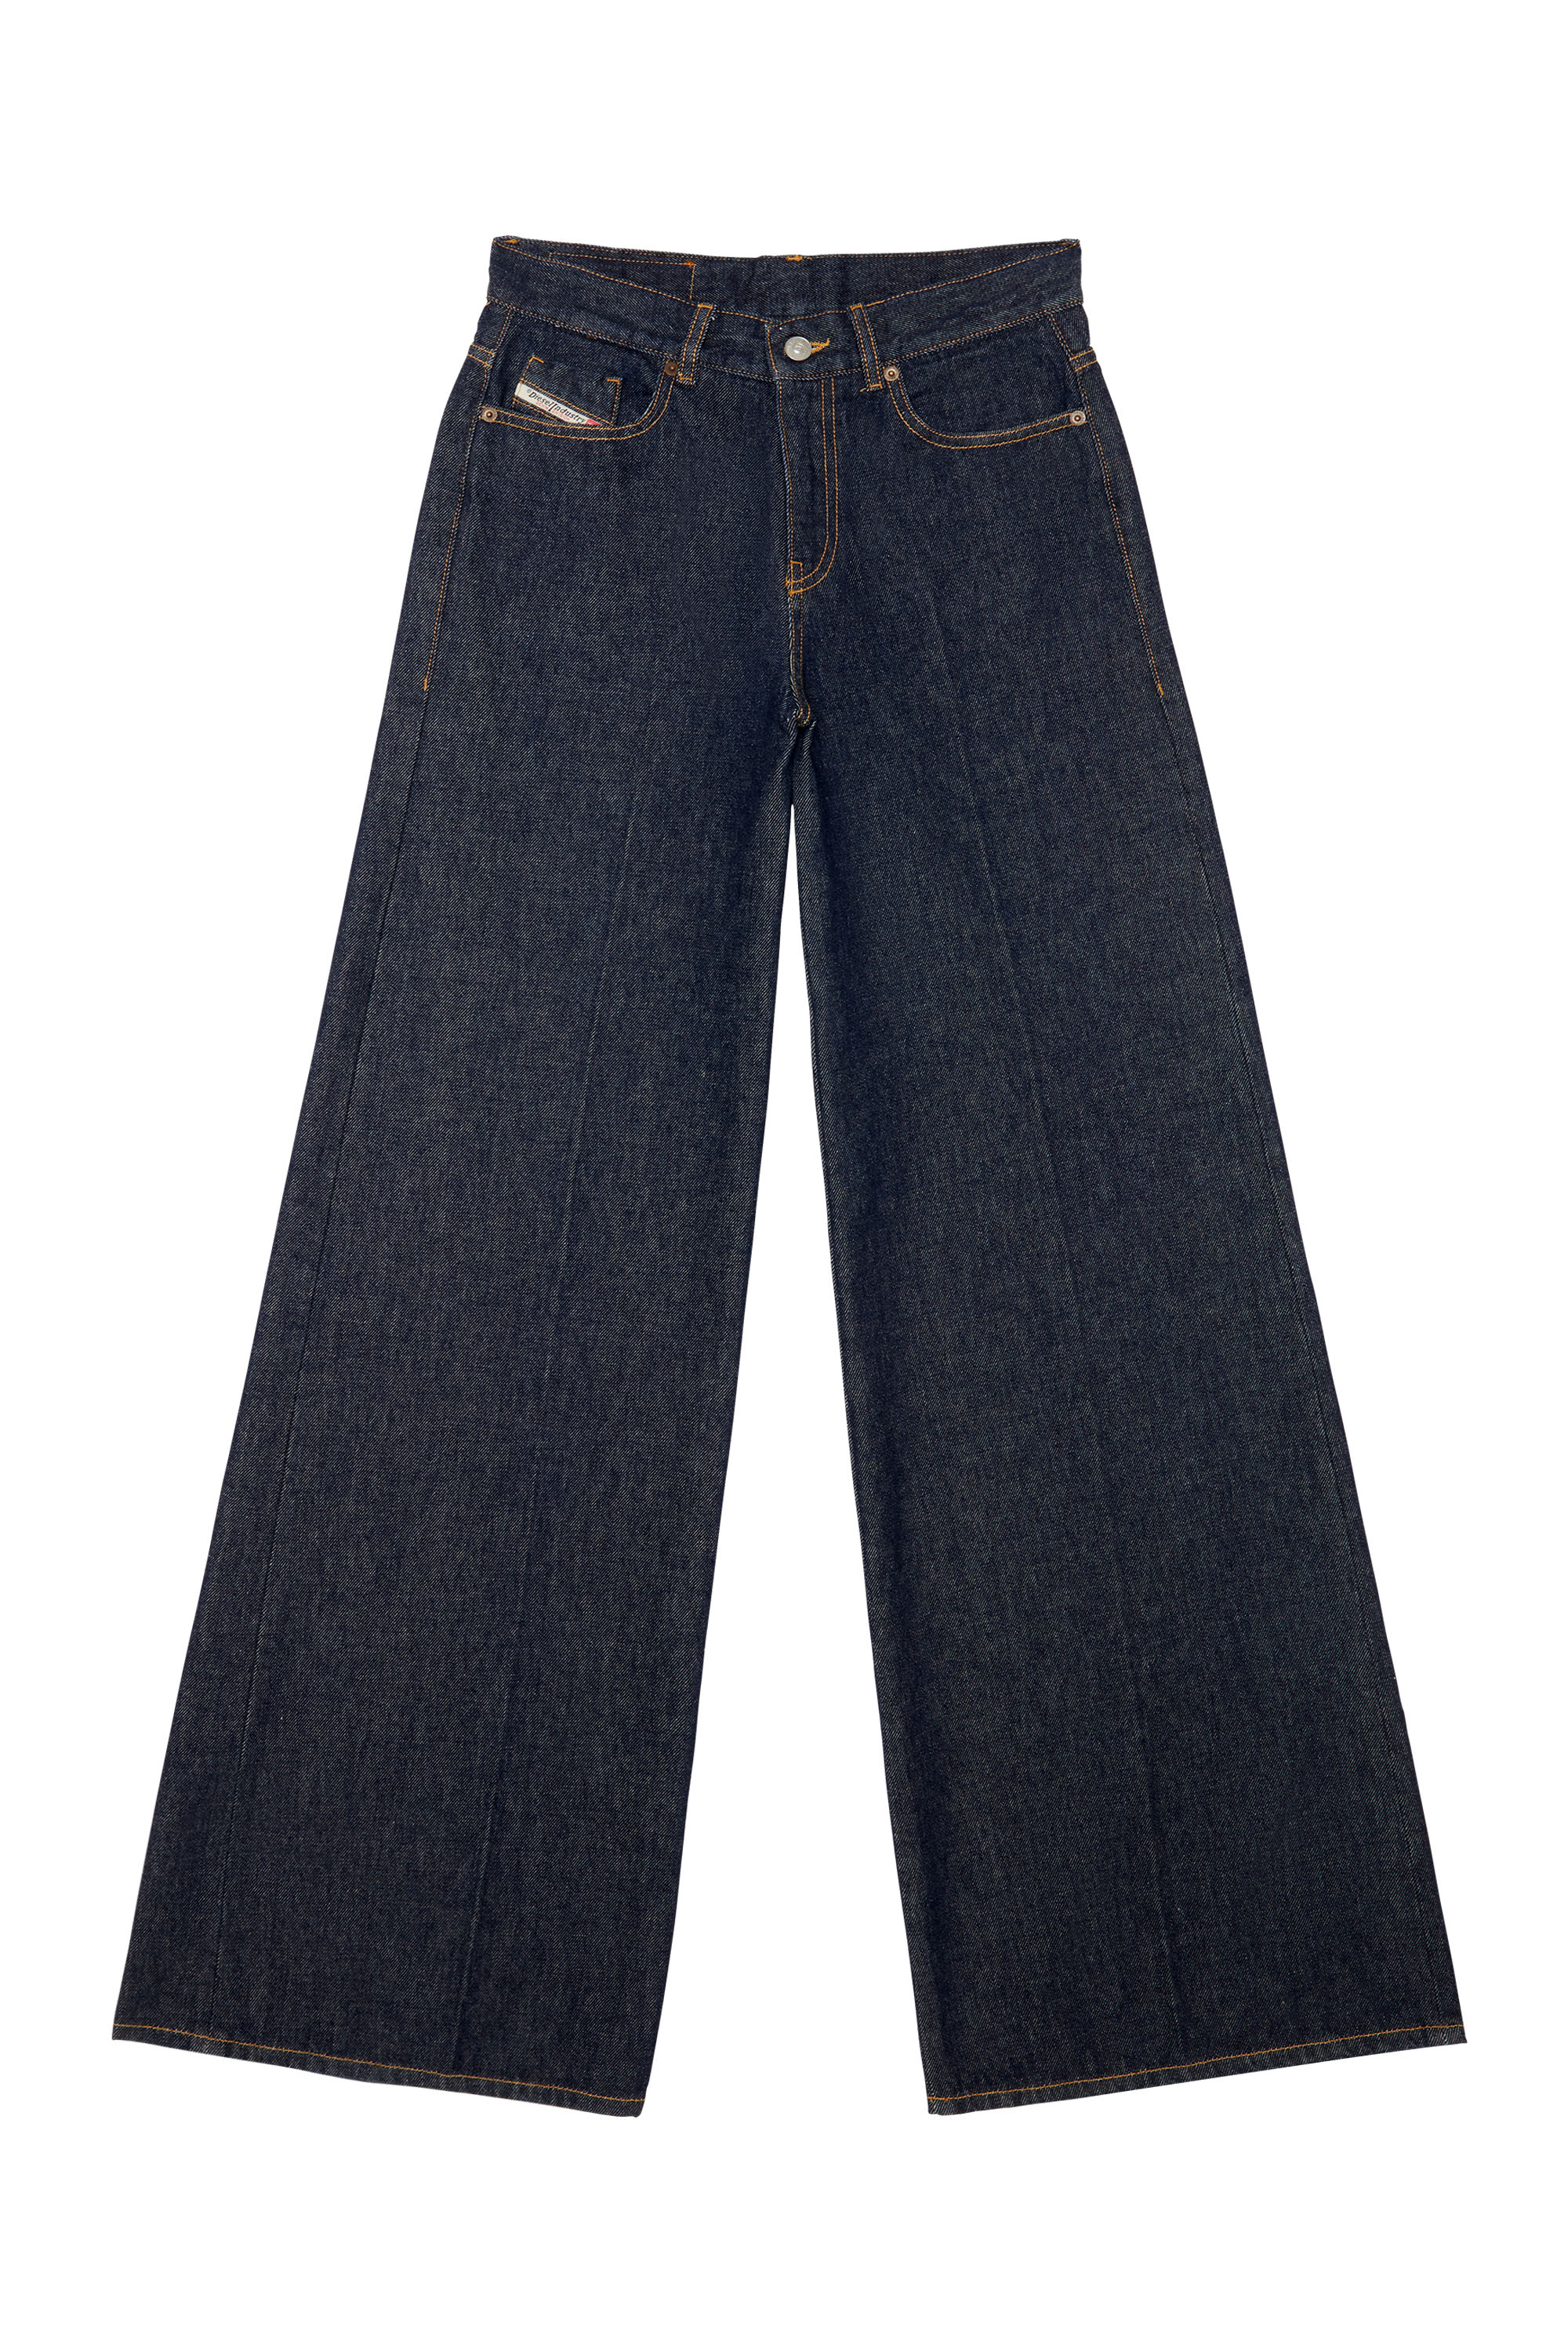 Bootcut and Flare Jeans 1978 D-Akemi Z9C02, Blu Scuro - Jeans